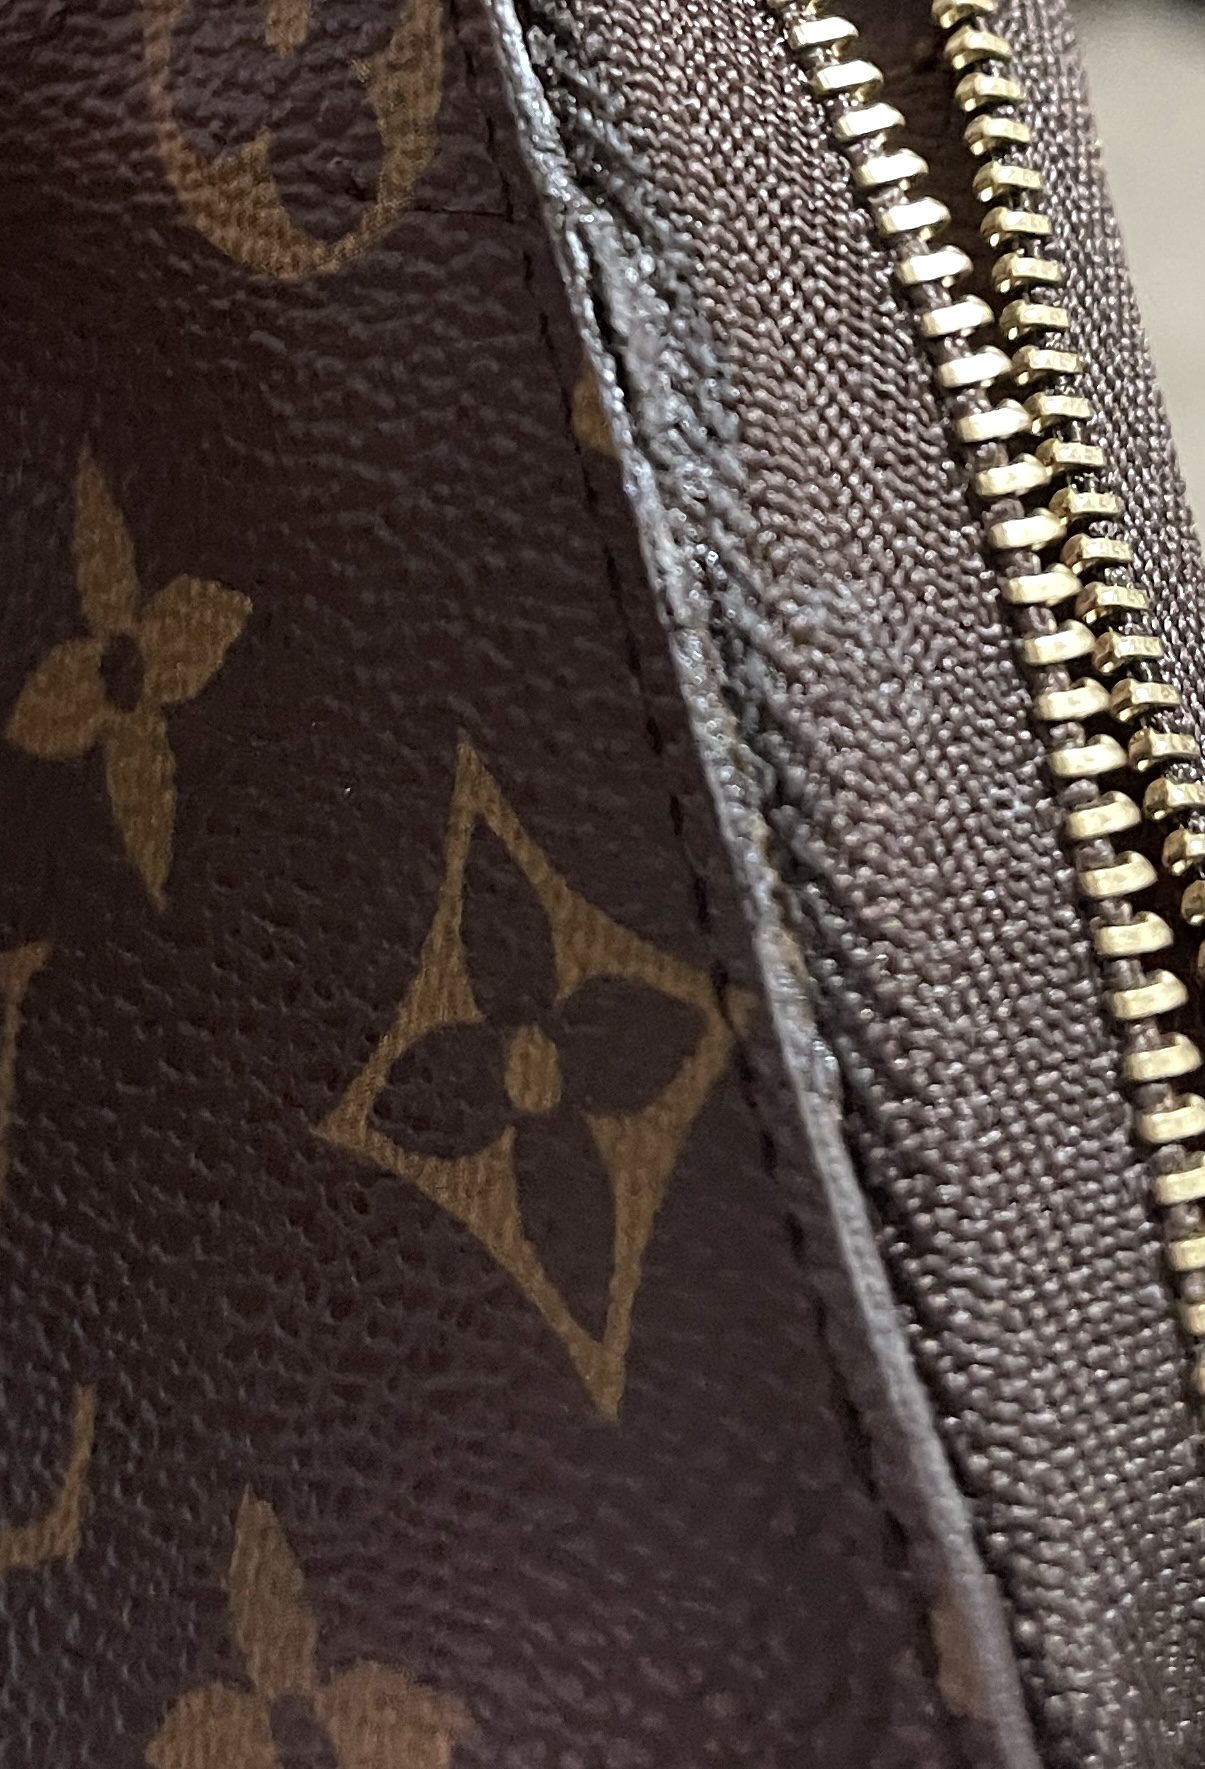 Louis Vuitton, Bags, Photo Of Louis Vuitton Wallet With Serial Number